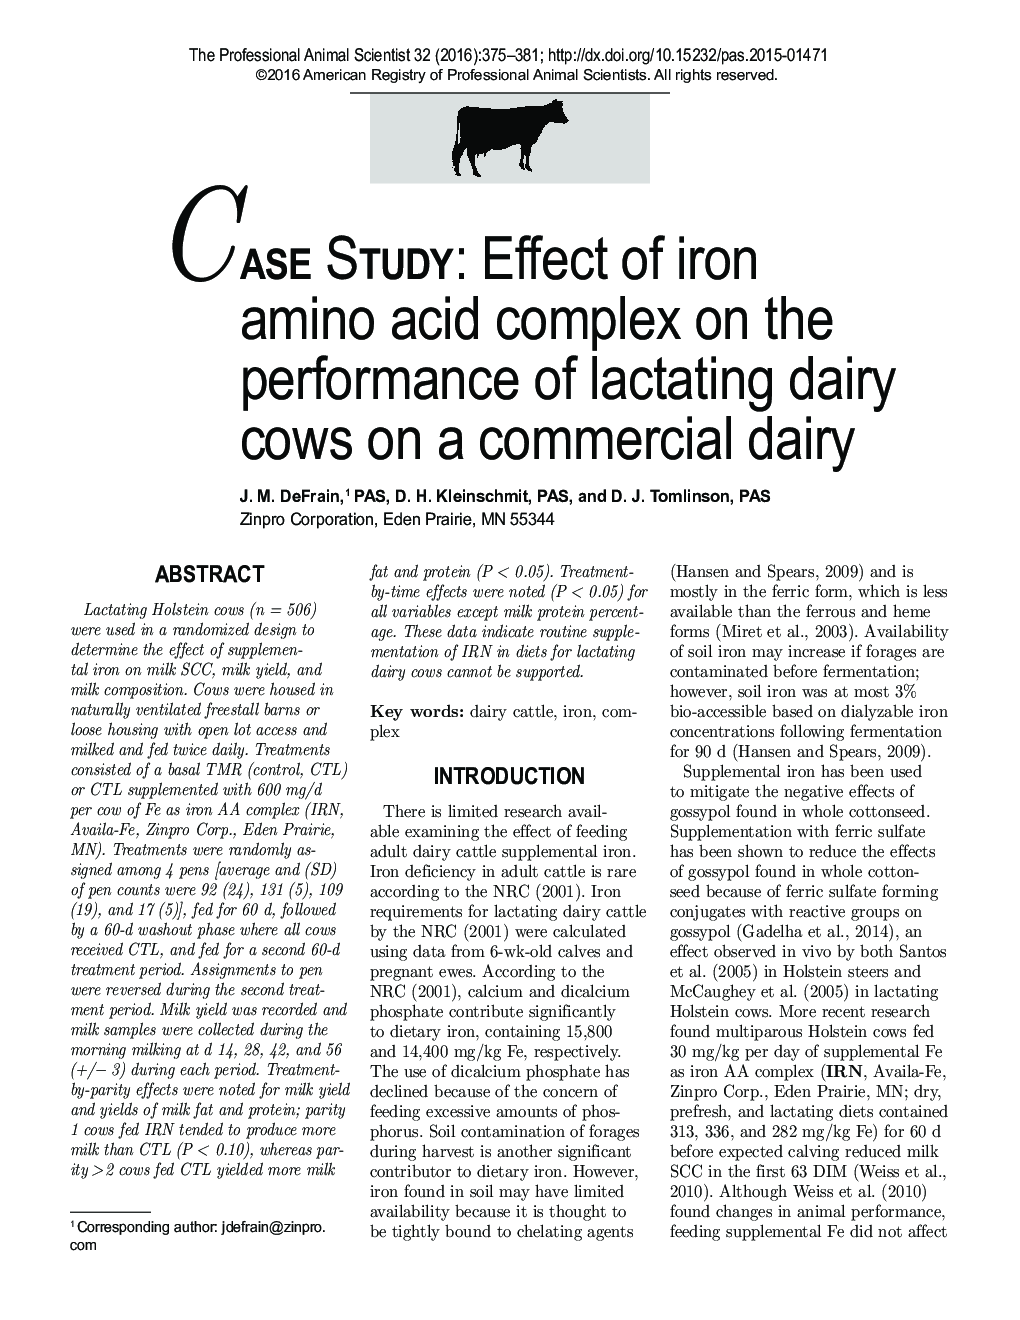 Case Study: Effect of iron amino acid complex on the performance of lactating dairy cows on a commercial dairy